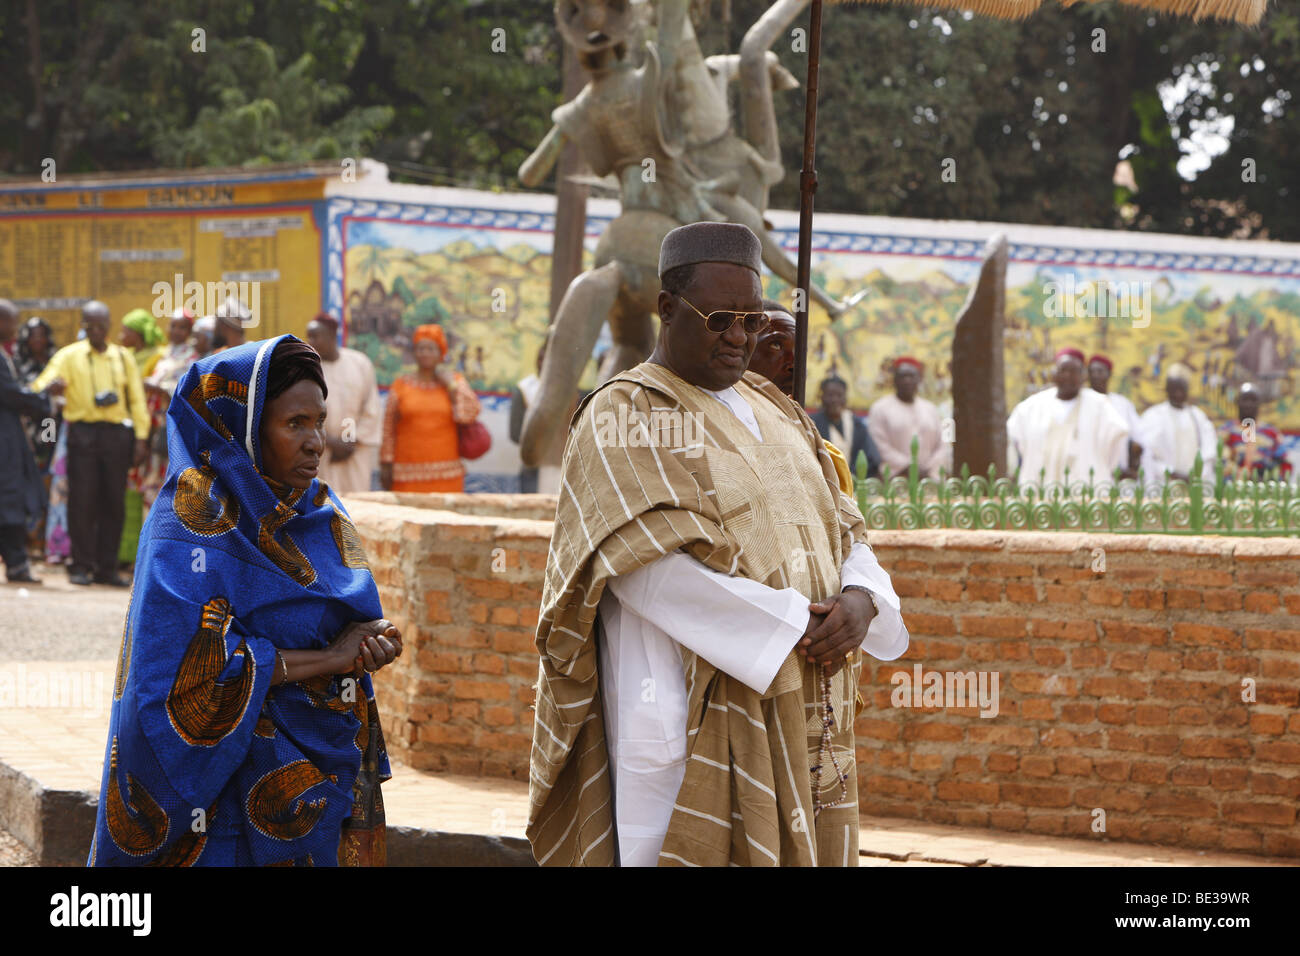 Sultan Ibrahim Mbombo Njoya in front of the Sultan's palace, holding an audience, Foumban, Cameroon, Africa Stock Photo